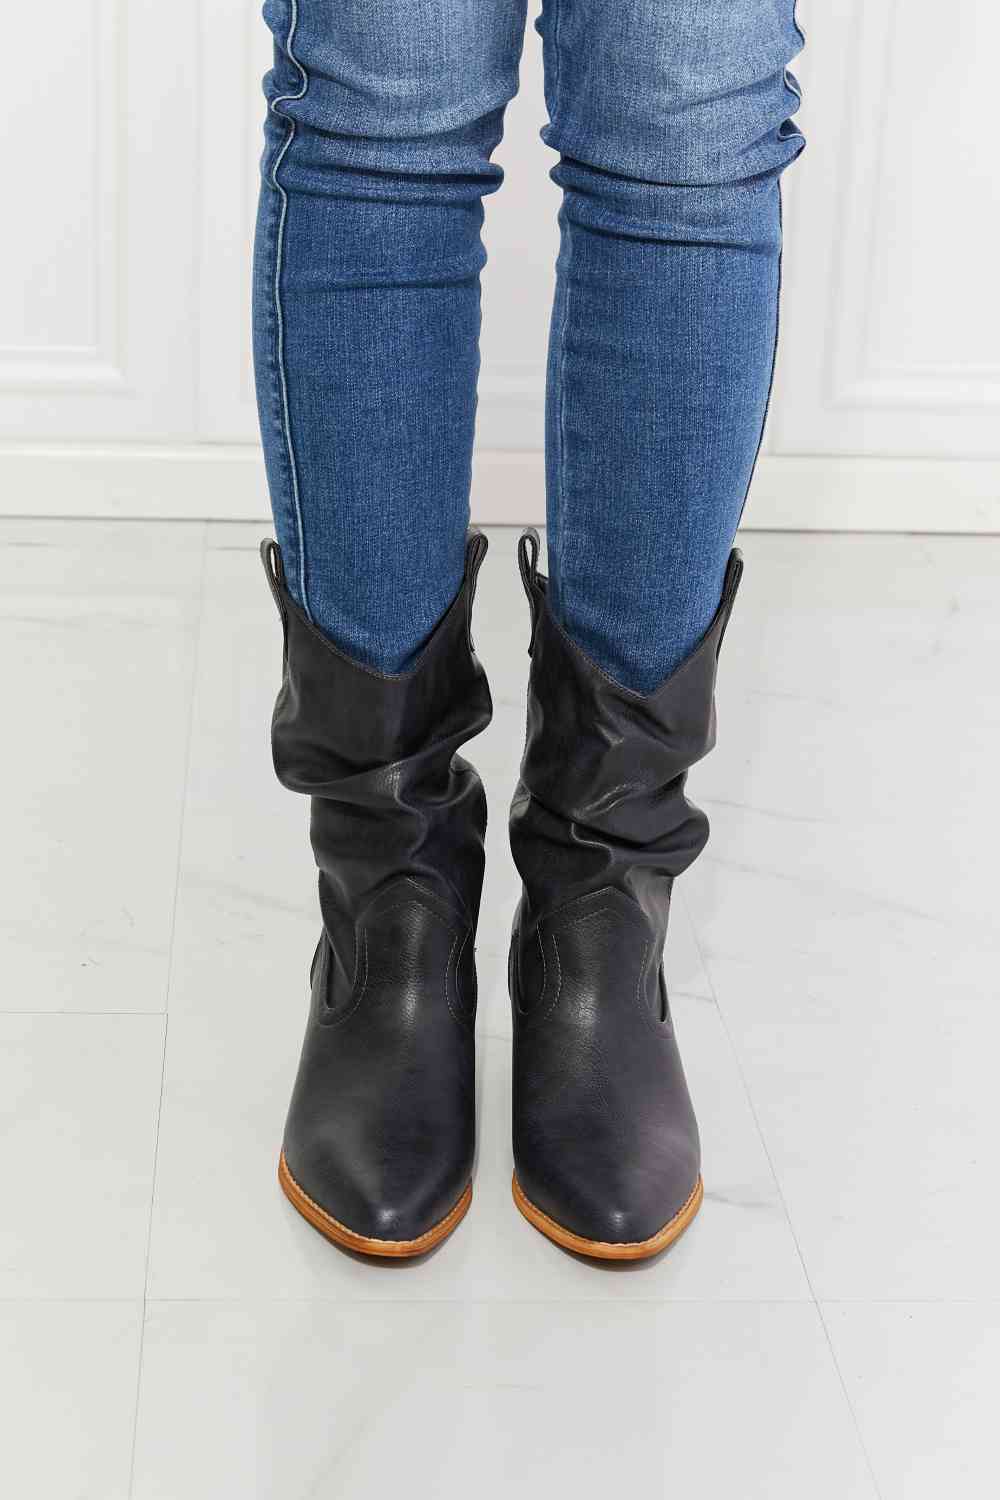 MMShoes Better in Texas Scrunch Cowboy Boots in Navy Navy / 6